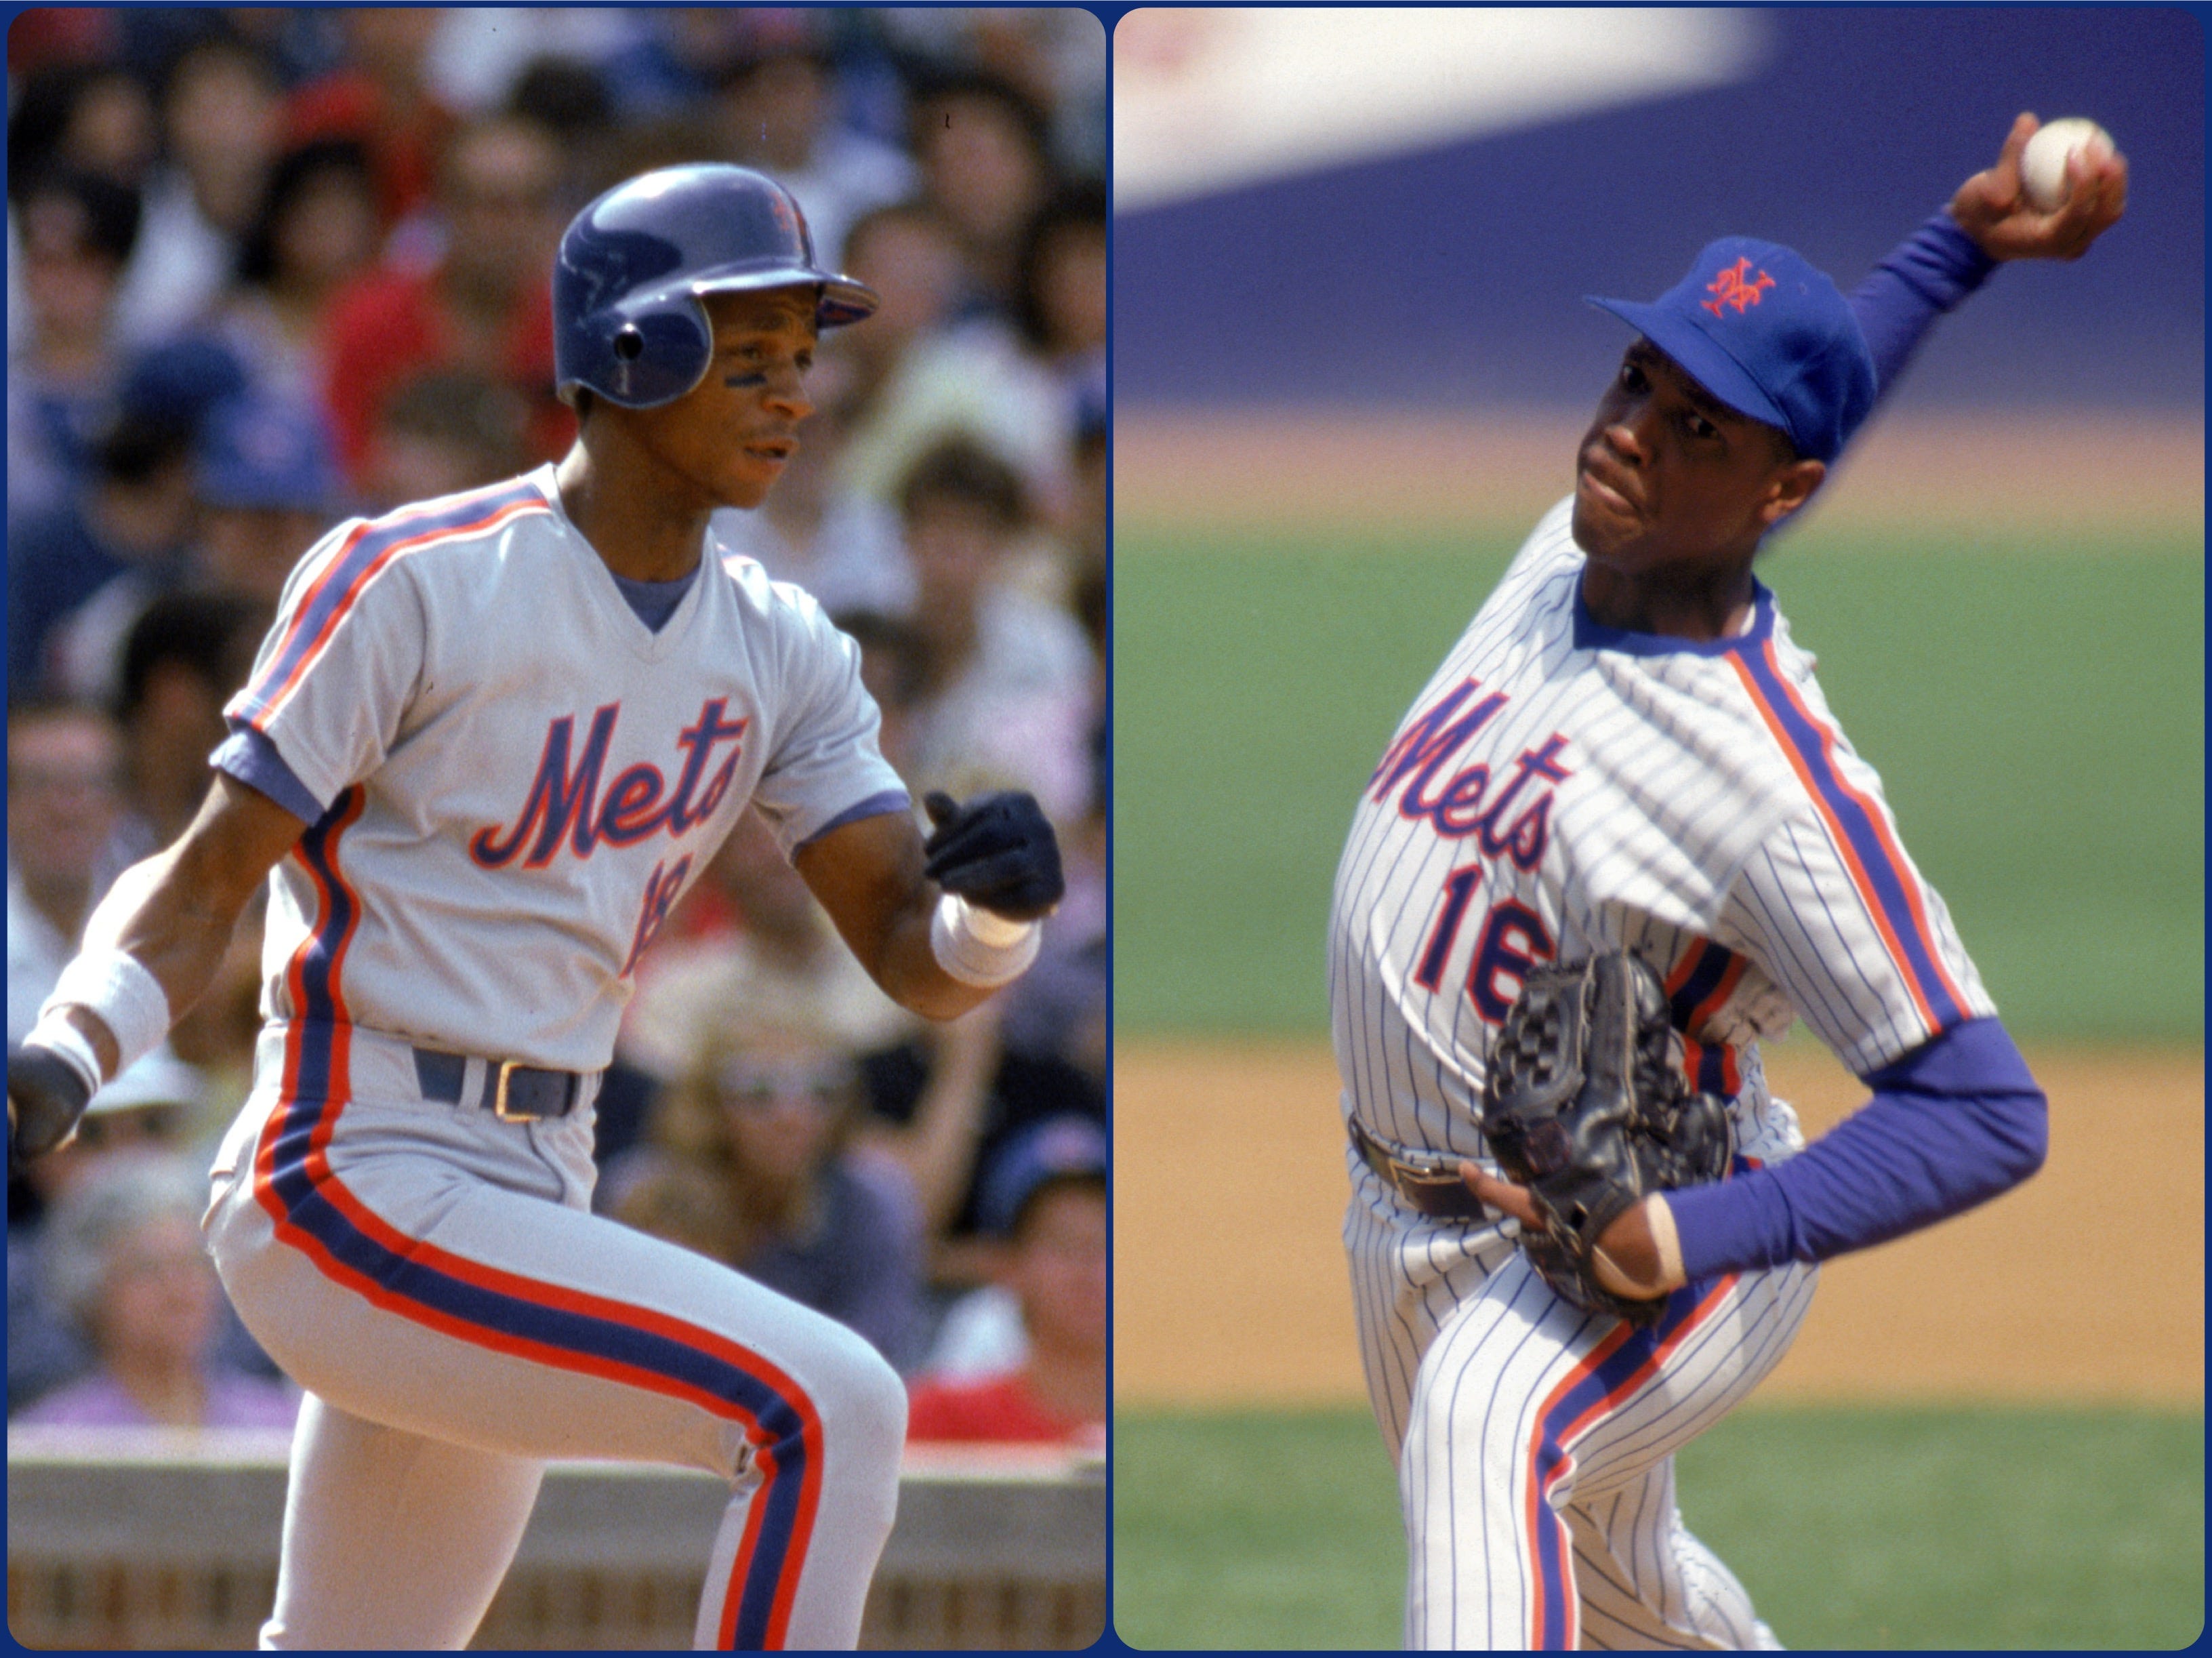 Gooden's No. 16 and Strawberry's No. 18 to be retired by Mets next season